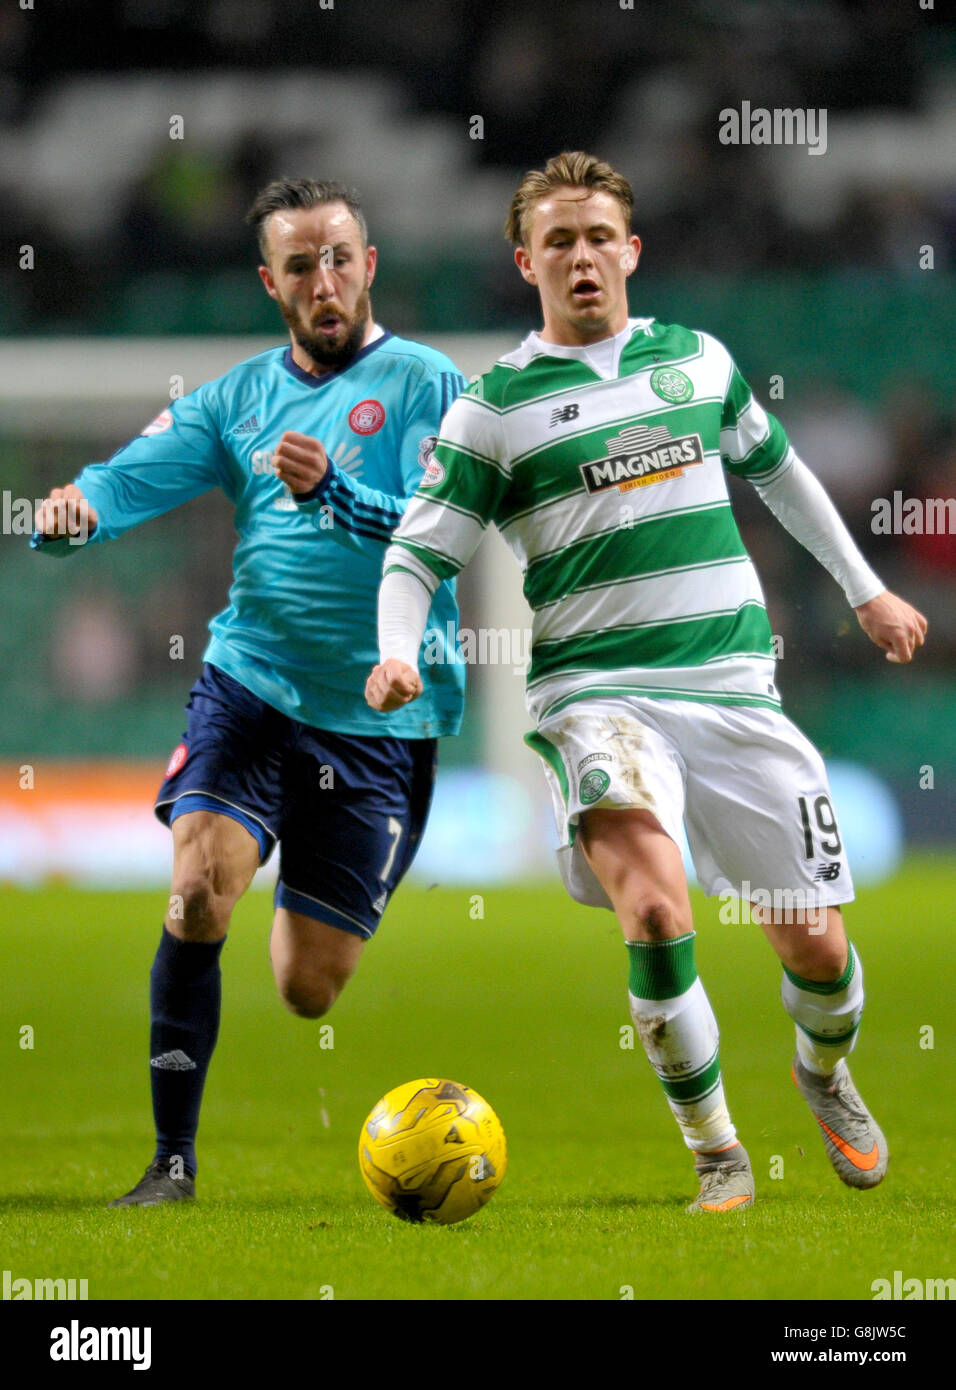 Celtic's Scott Allan and Hamilton Academical's Dougie Imrie battle for the ball during the Ladbrokes Scottish Premiership at Celtic Park, Glasgow. Stock Photo